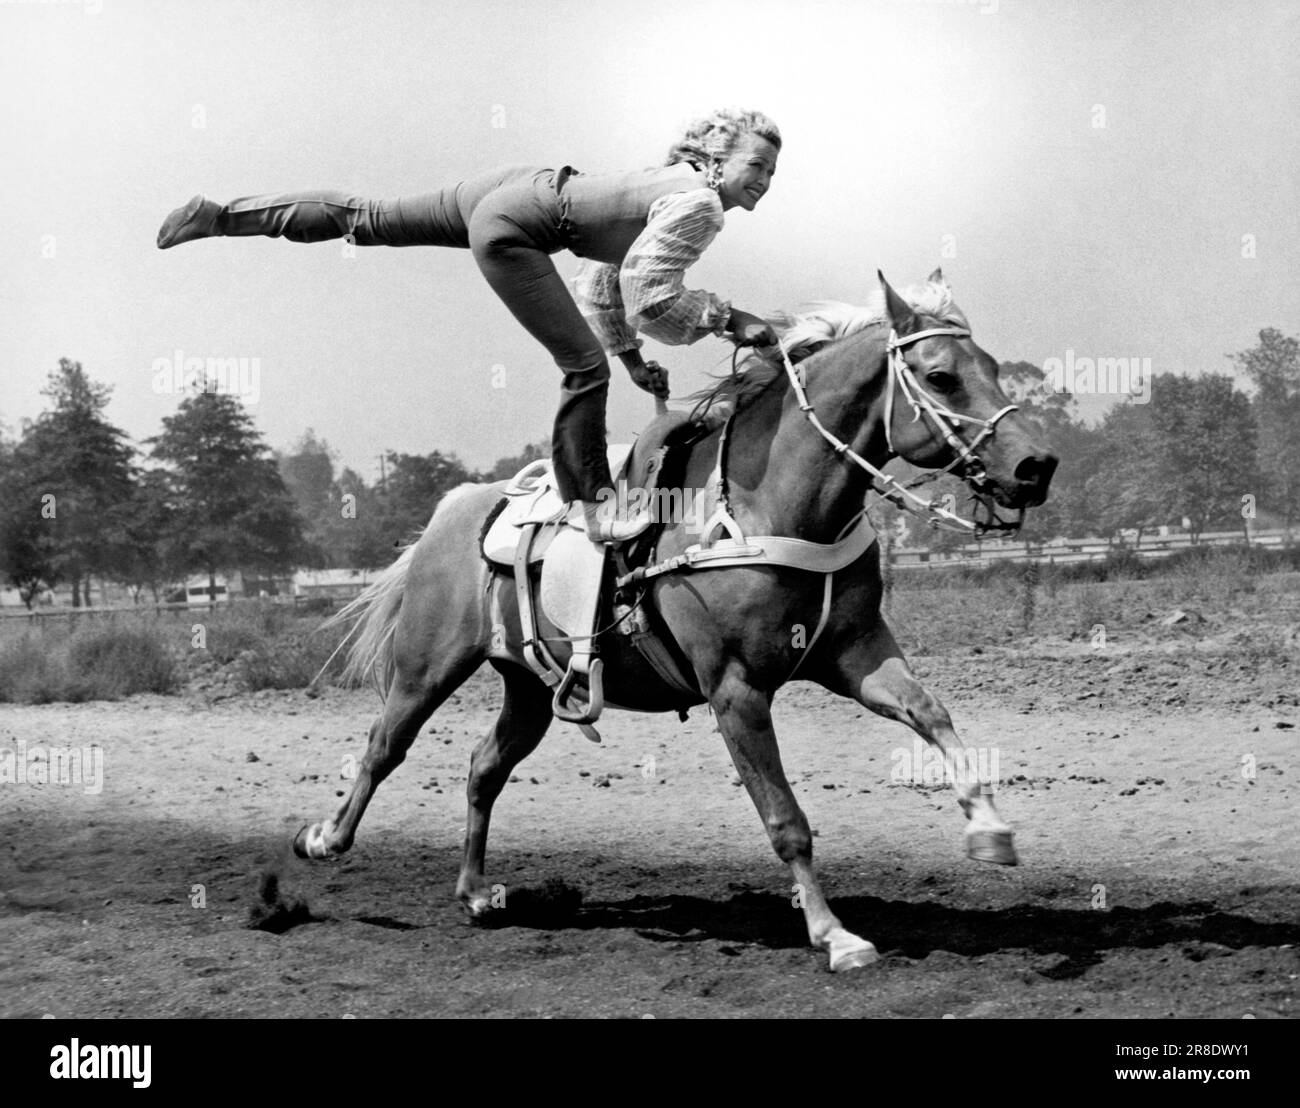 Los Angeles, California:  c. 1950. National Cowgirl Hall of Fame member, Faye Blessing, (1920-1999) performing on her palomino horse, Flash. Stock Photo